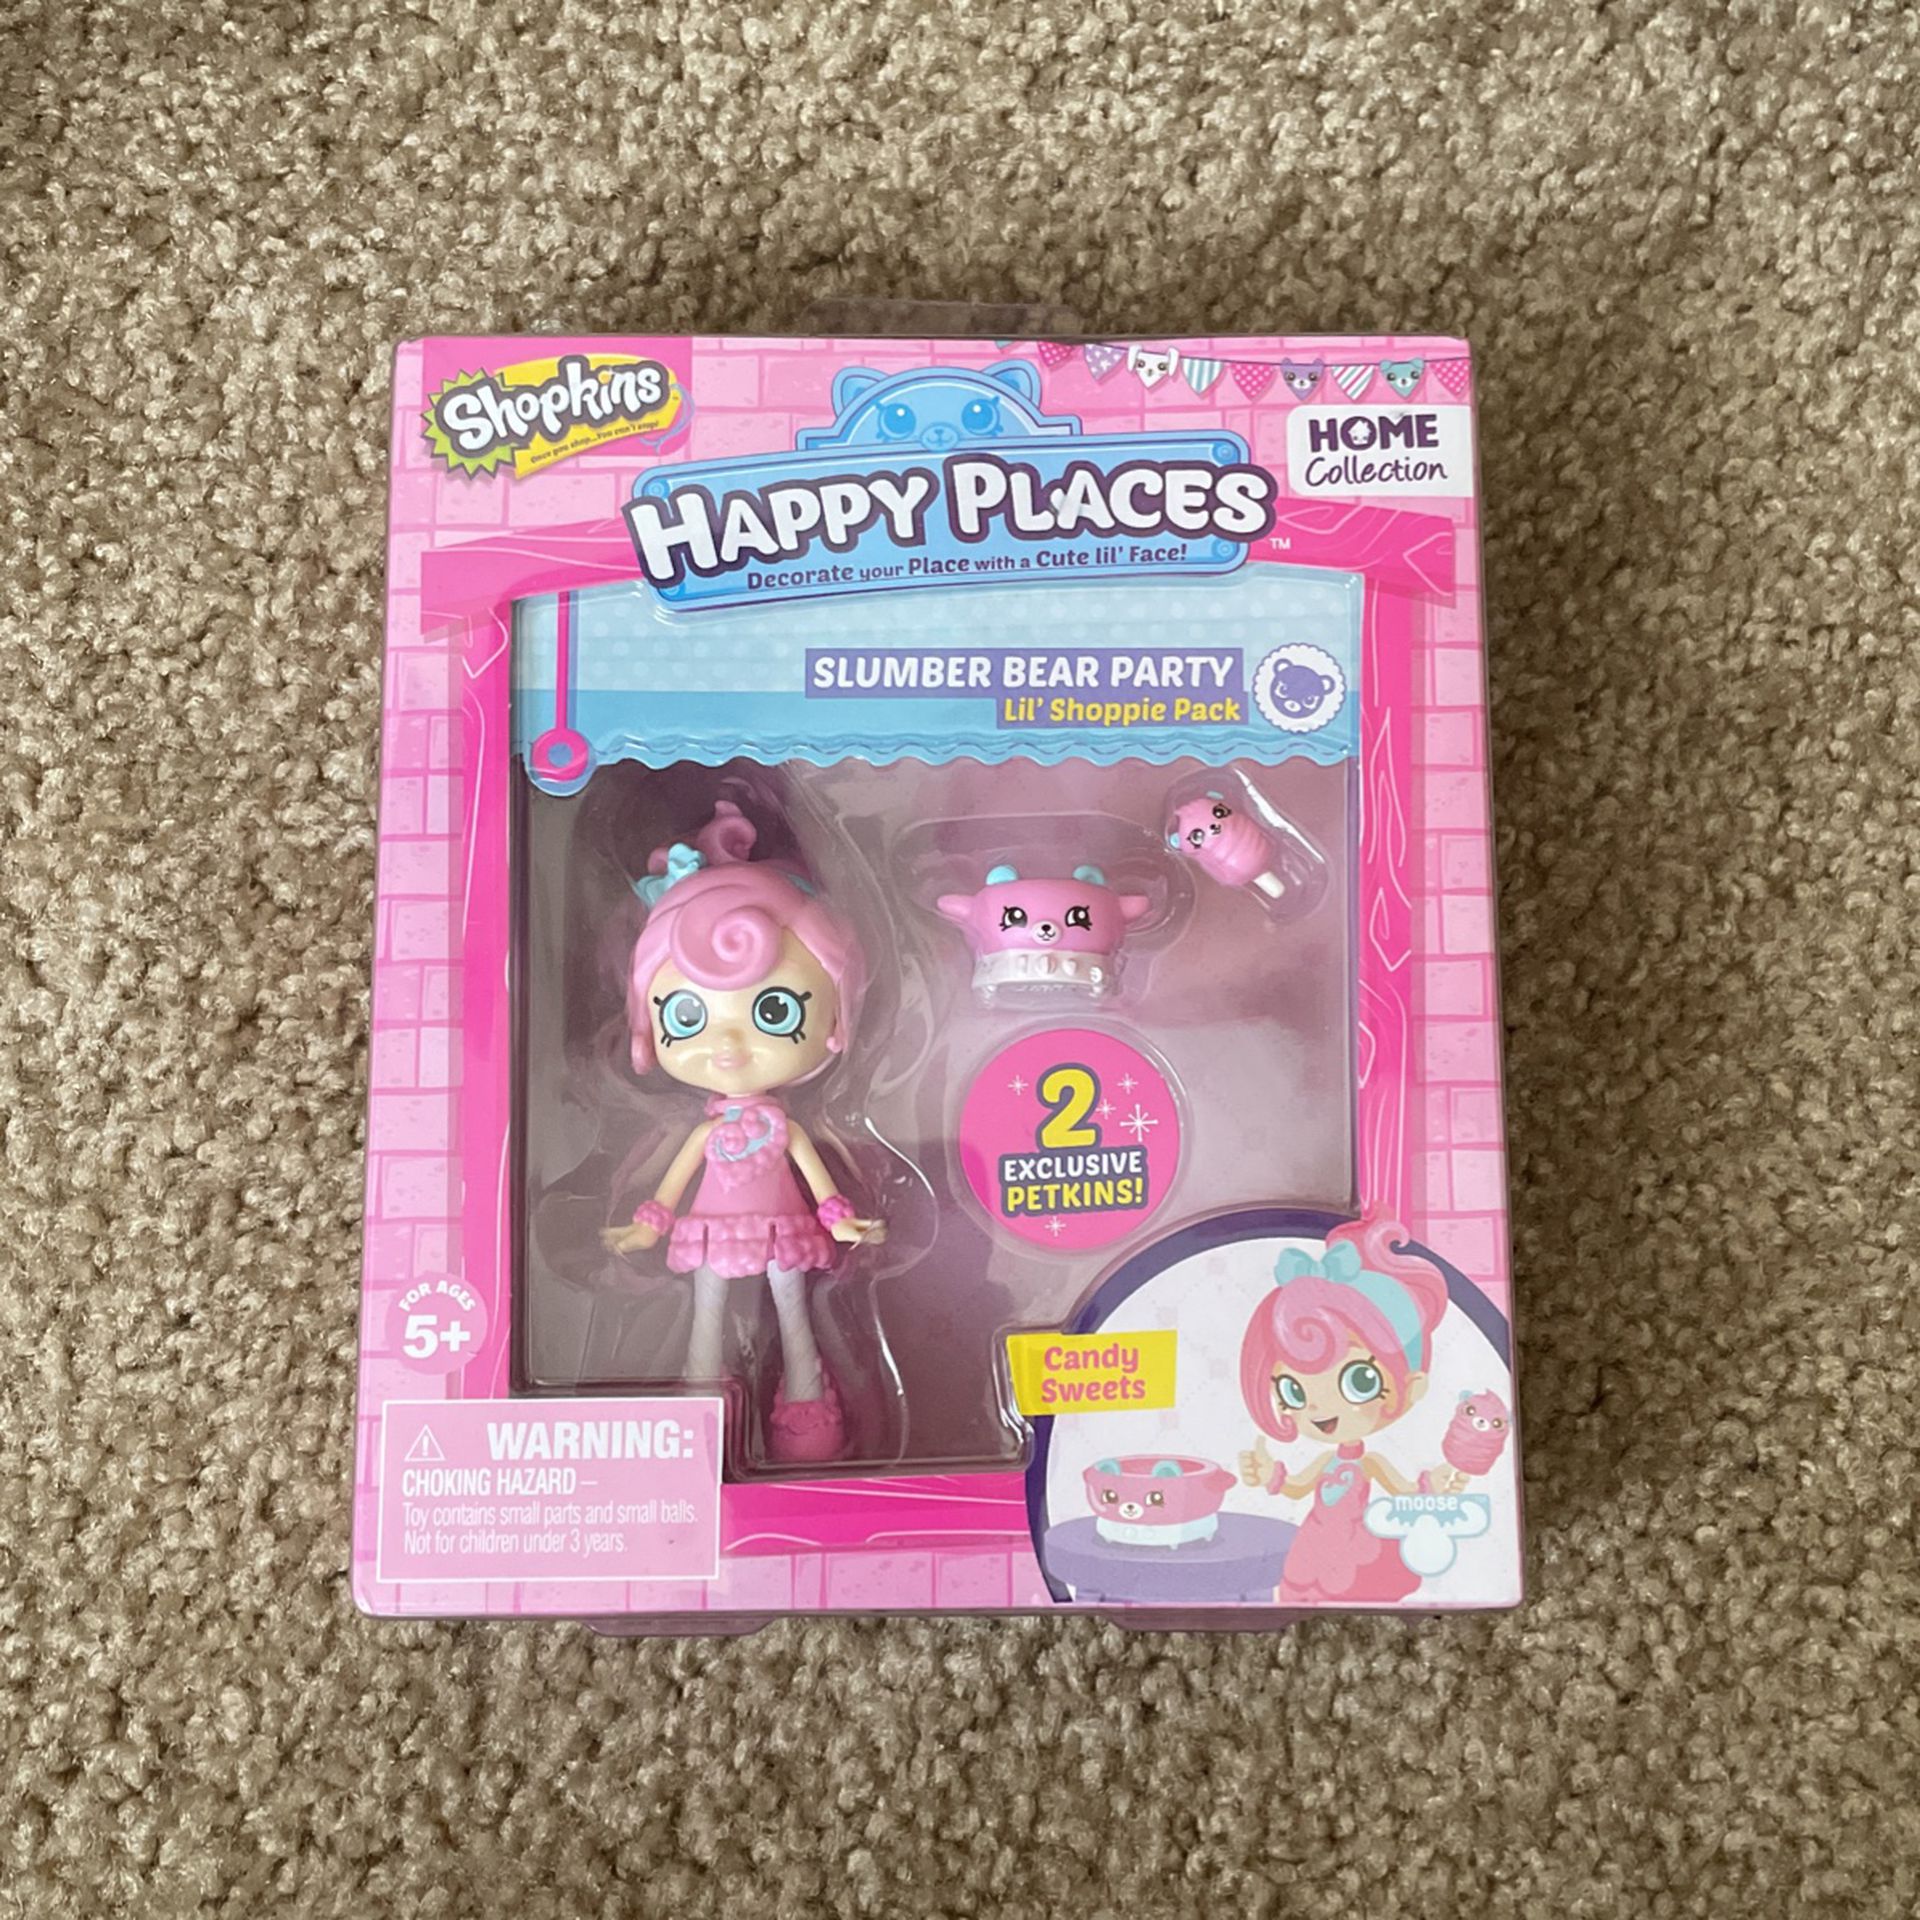 Shopkins Happy Places Slumber Party Candy Sweets